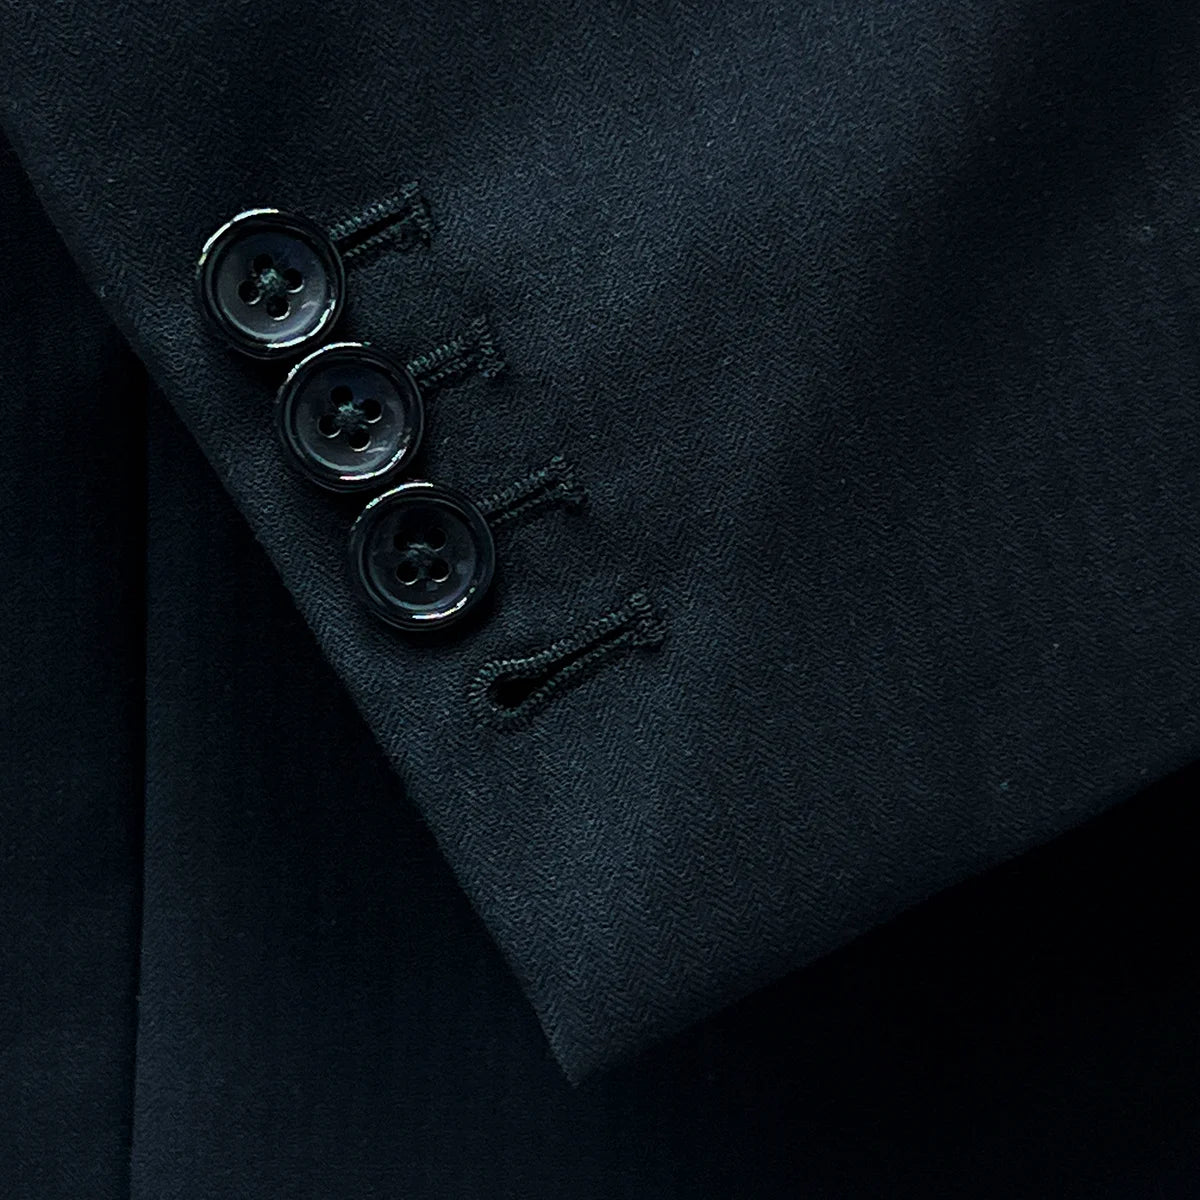 Functional sleeve buttonholes on a tailored black herringbone suit.